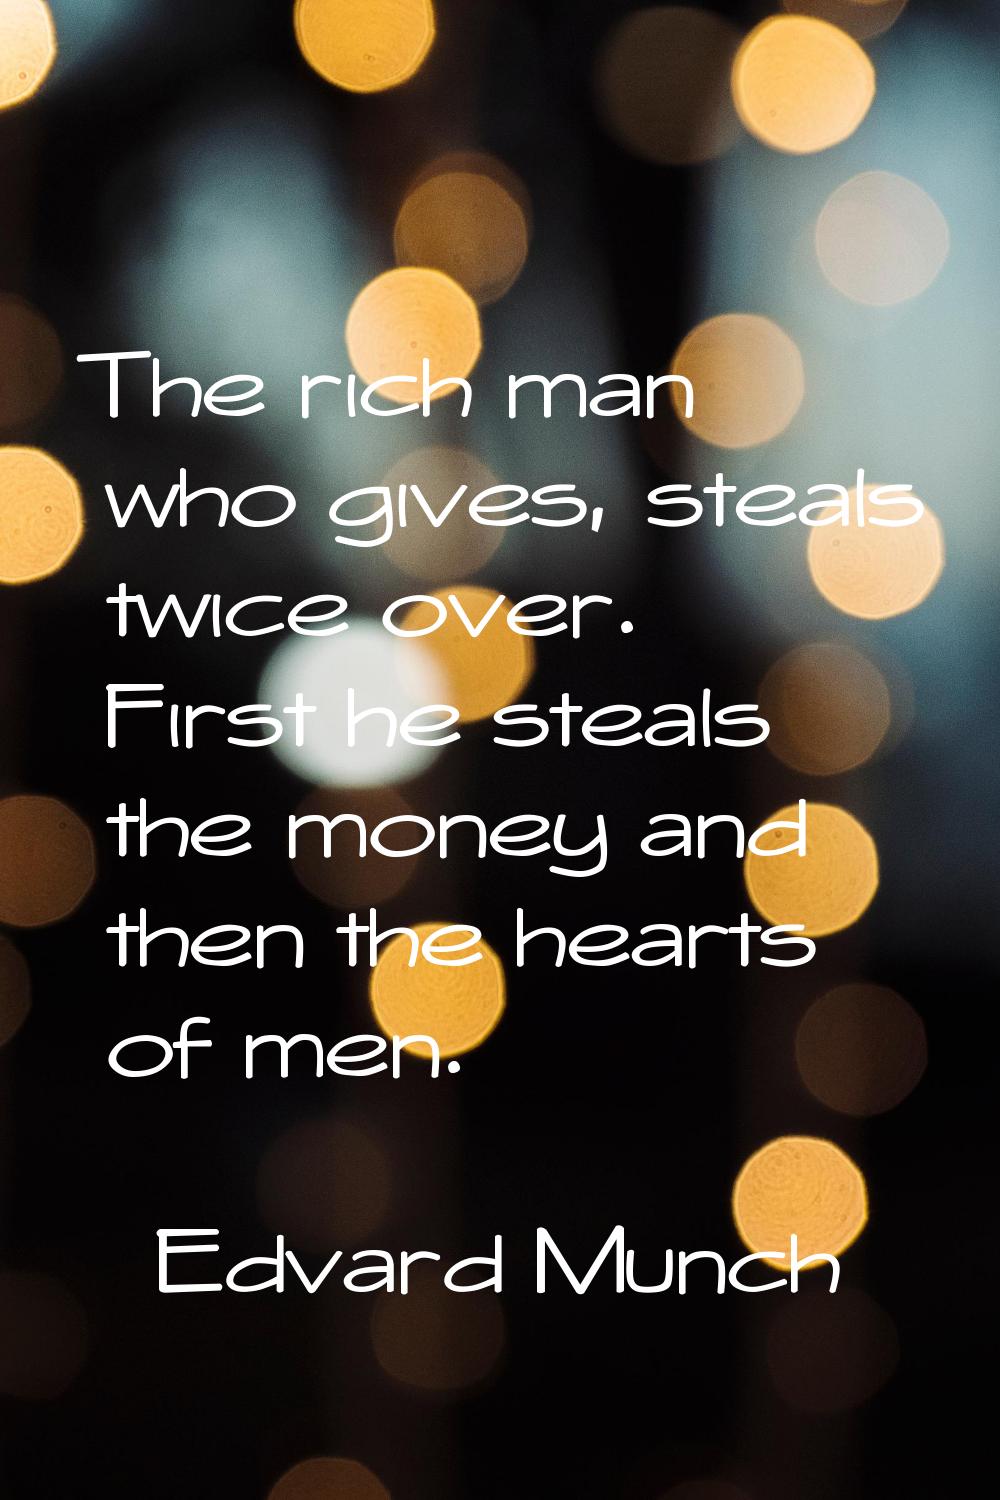 The rich man who gives, steals twice over. First he steals the money and then the hearts of men.